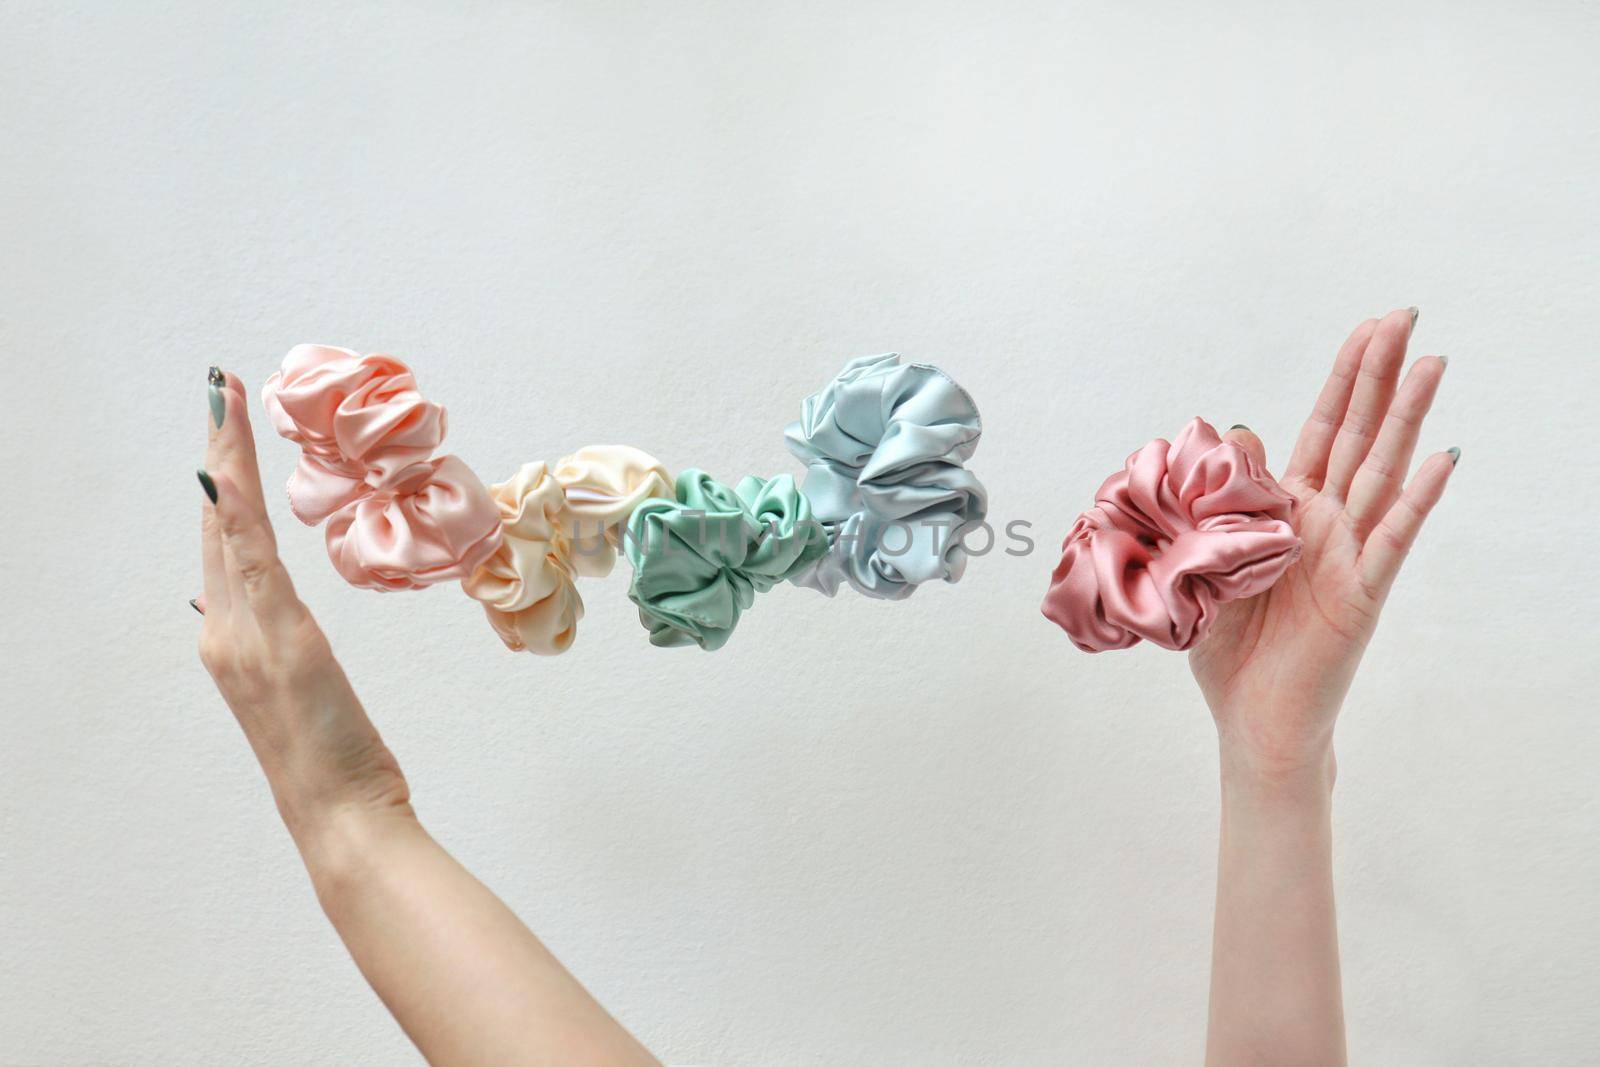 Lot of floating Colorful silk Scrunchies on womas hands isolated white. Hairdressing tools and accessories. Hair Scrunchies, Elastic HairBands, flying or falling Scrunchie Hairband for girls or ladies